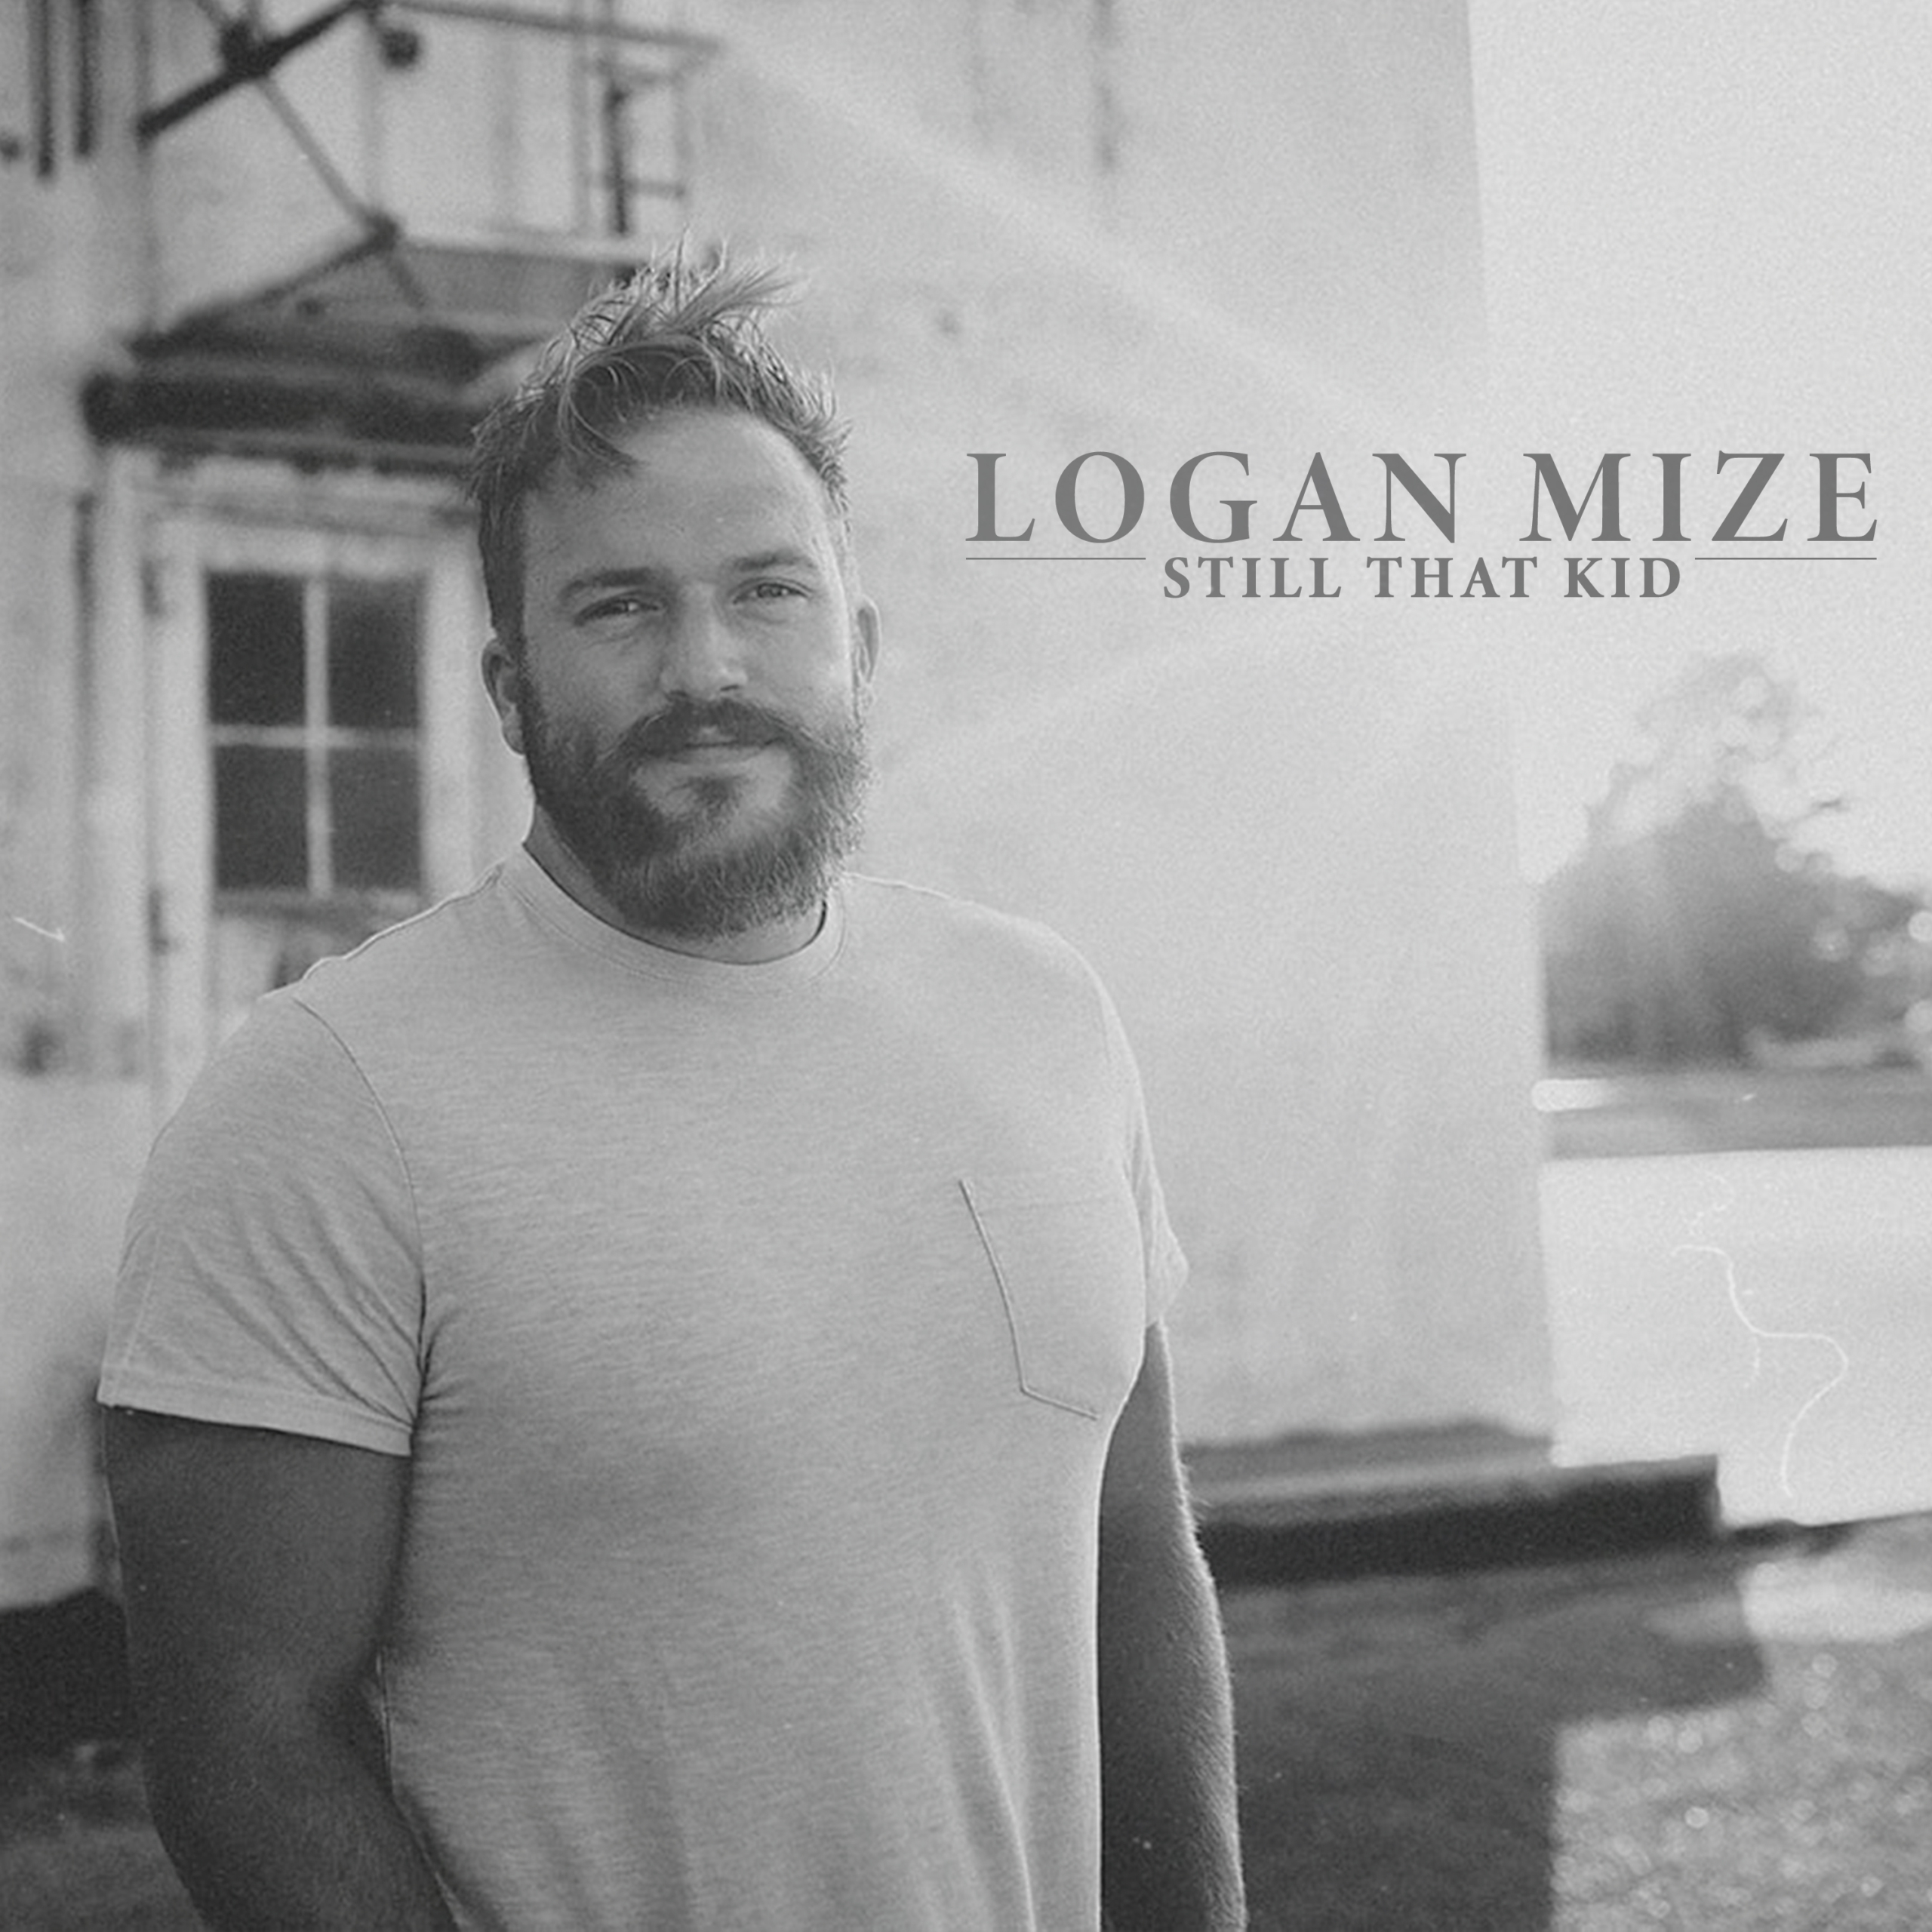 Logan Mize’s New Album “Still That Kid” is out now, January 27th